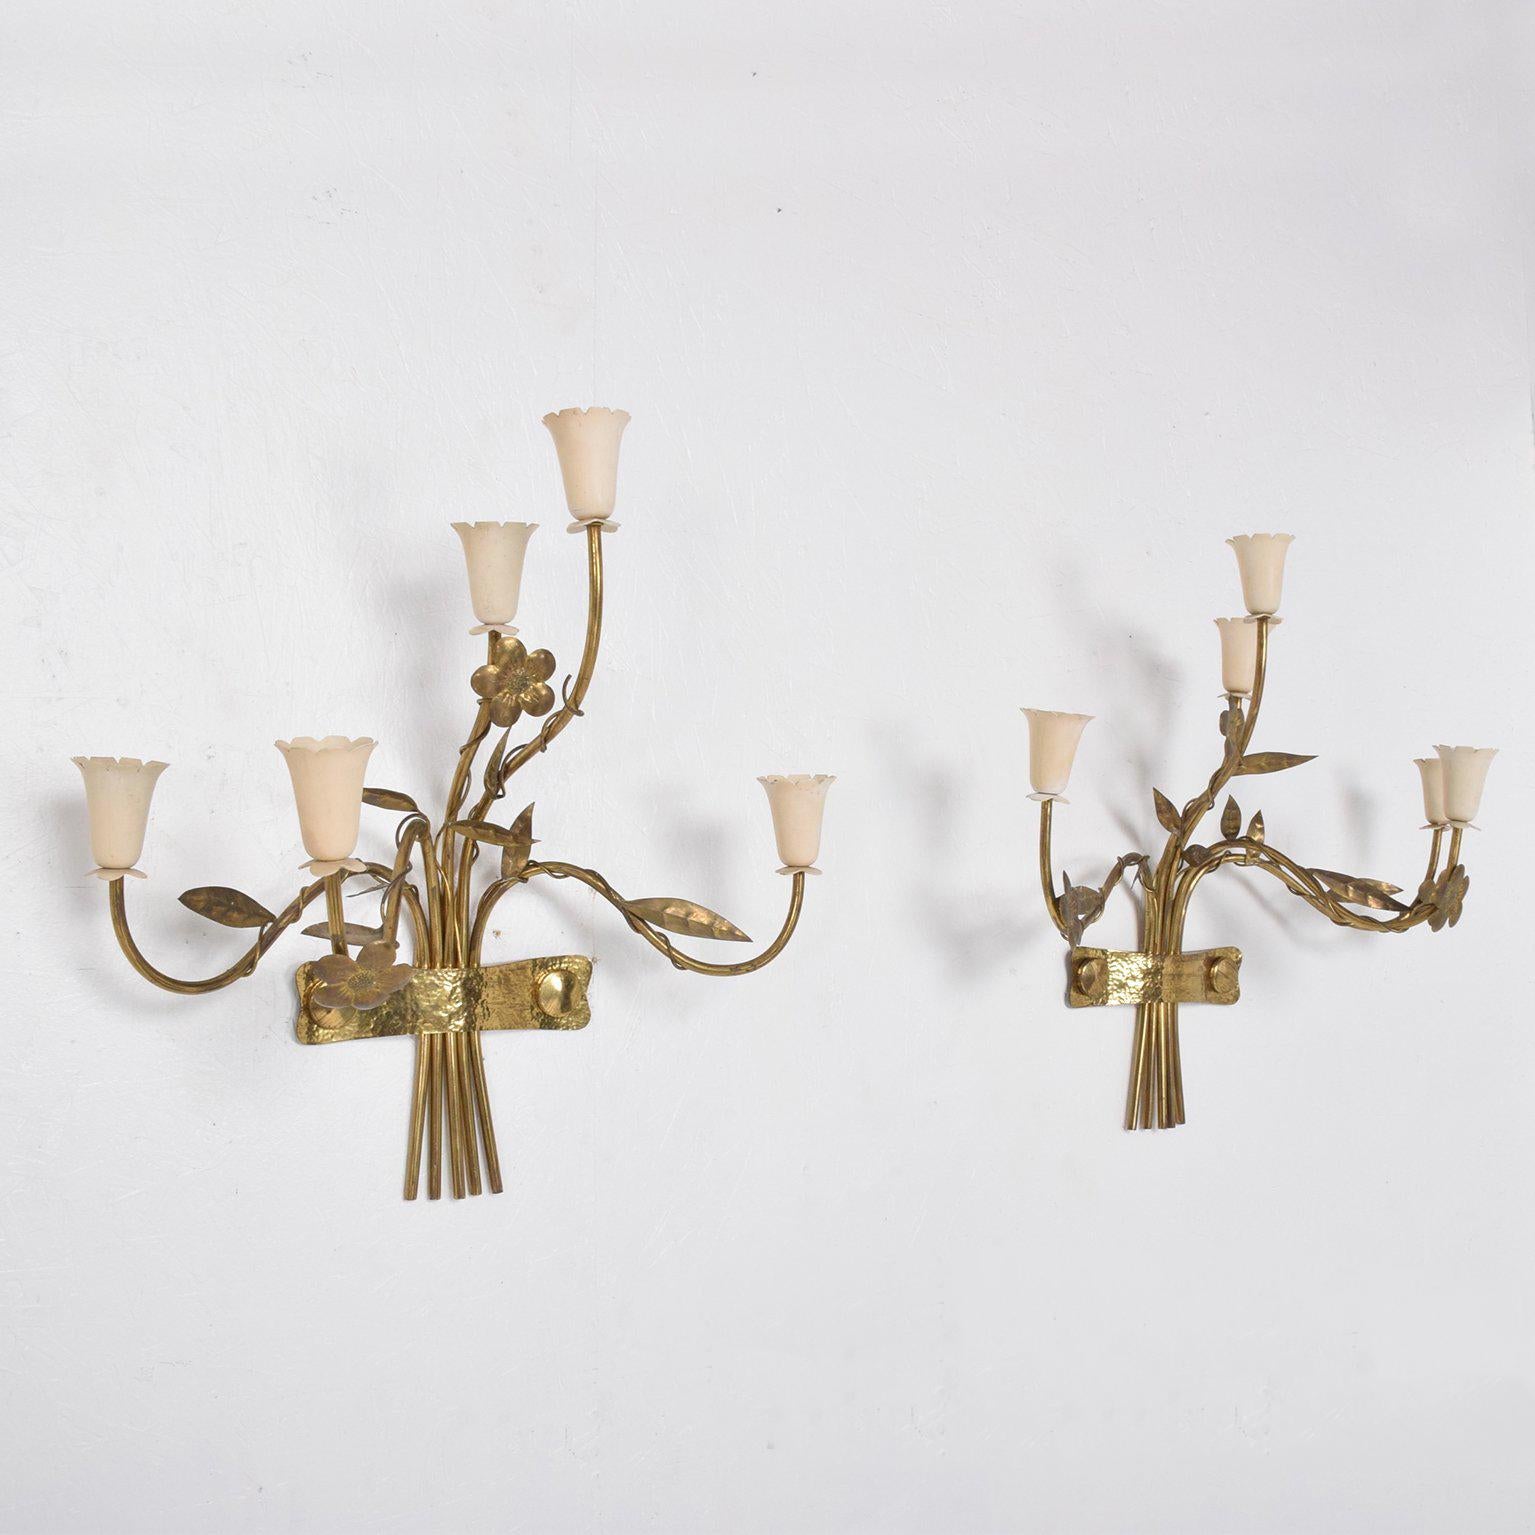 For your consideration a pair of Mid-Century Modern wall sconces. Made in Italy, circa 1950s.

Five arms with beautiful sculptural shape. 
Aluminium shade covers painted in original off-white color.

No stamp or label present from the maker.